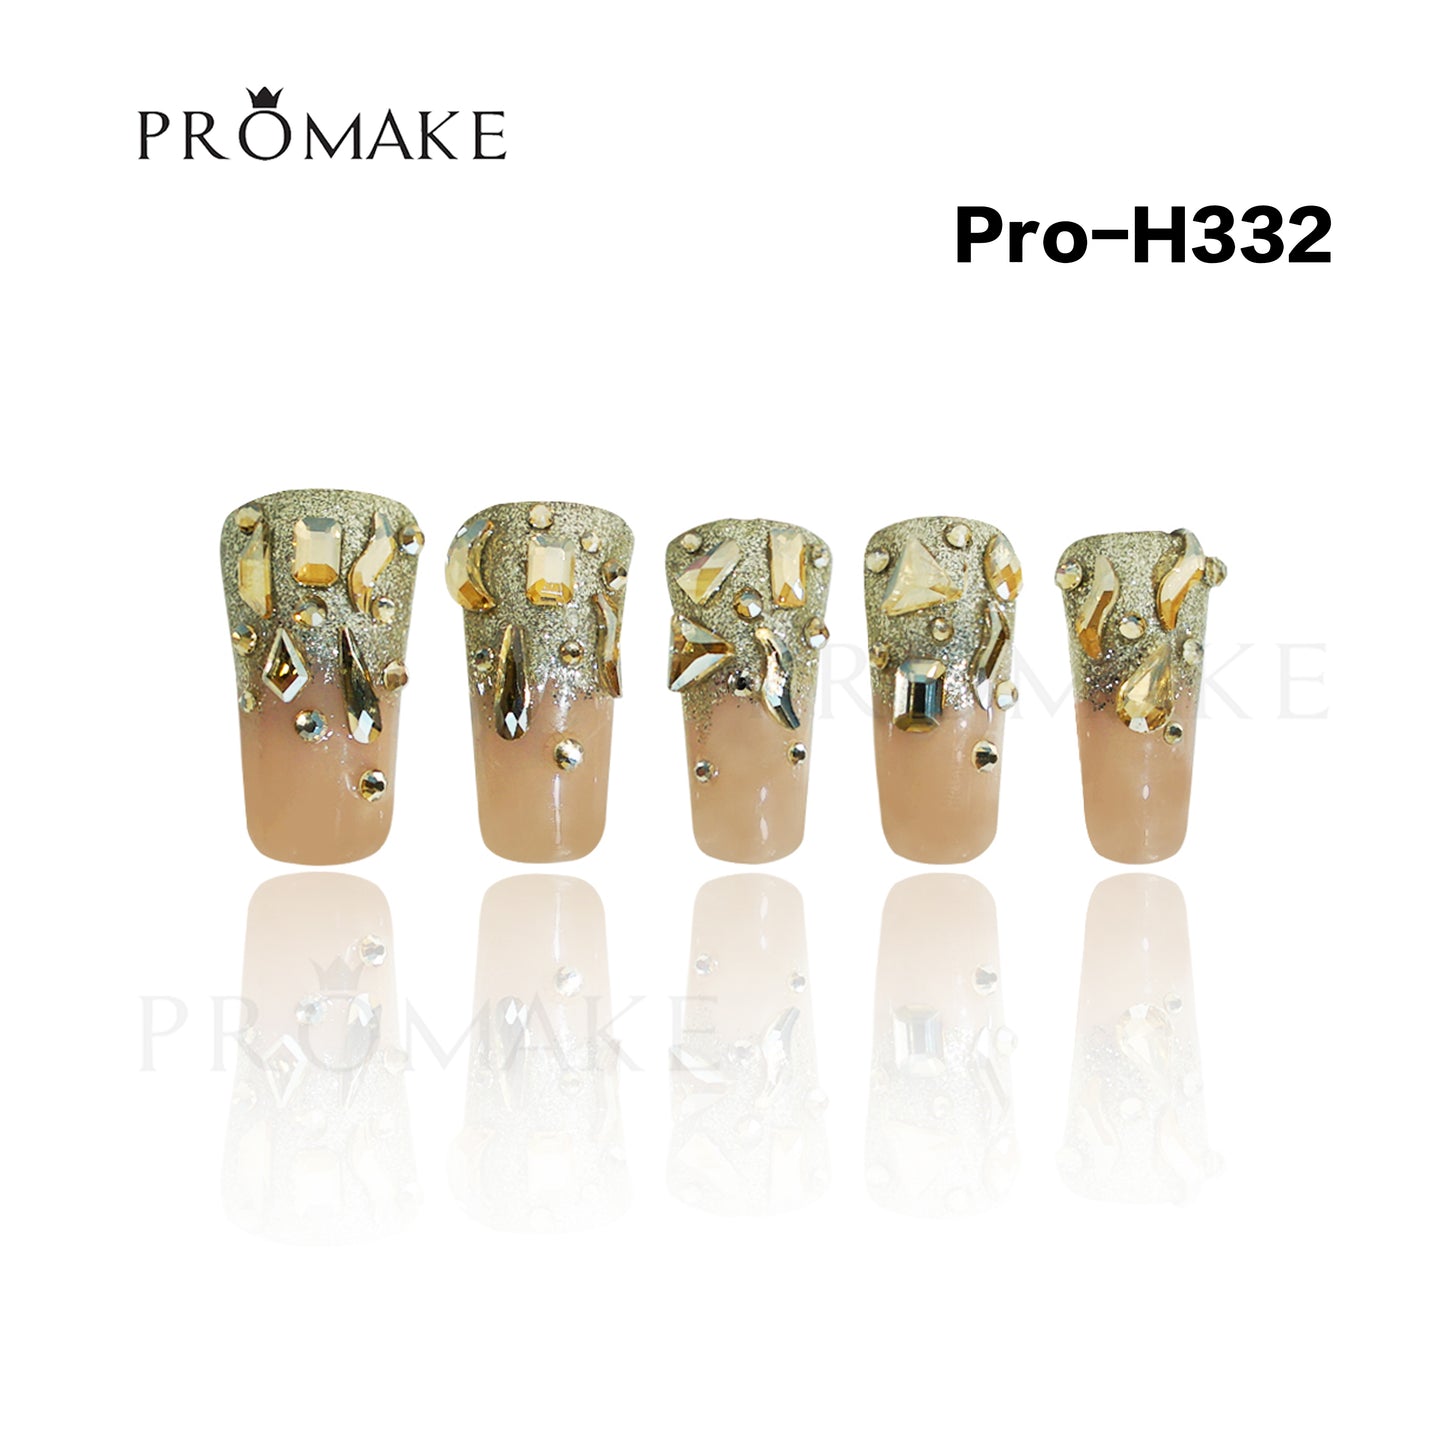 [New Arrival] Promake Luxury - DUCK TIPS - H331-H334 - Custom Handmade Press On Nails 10PCS Reuseable Nails wtih Nail tools